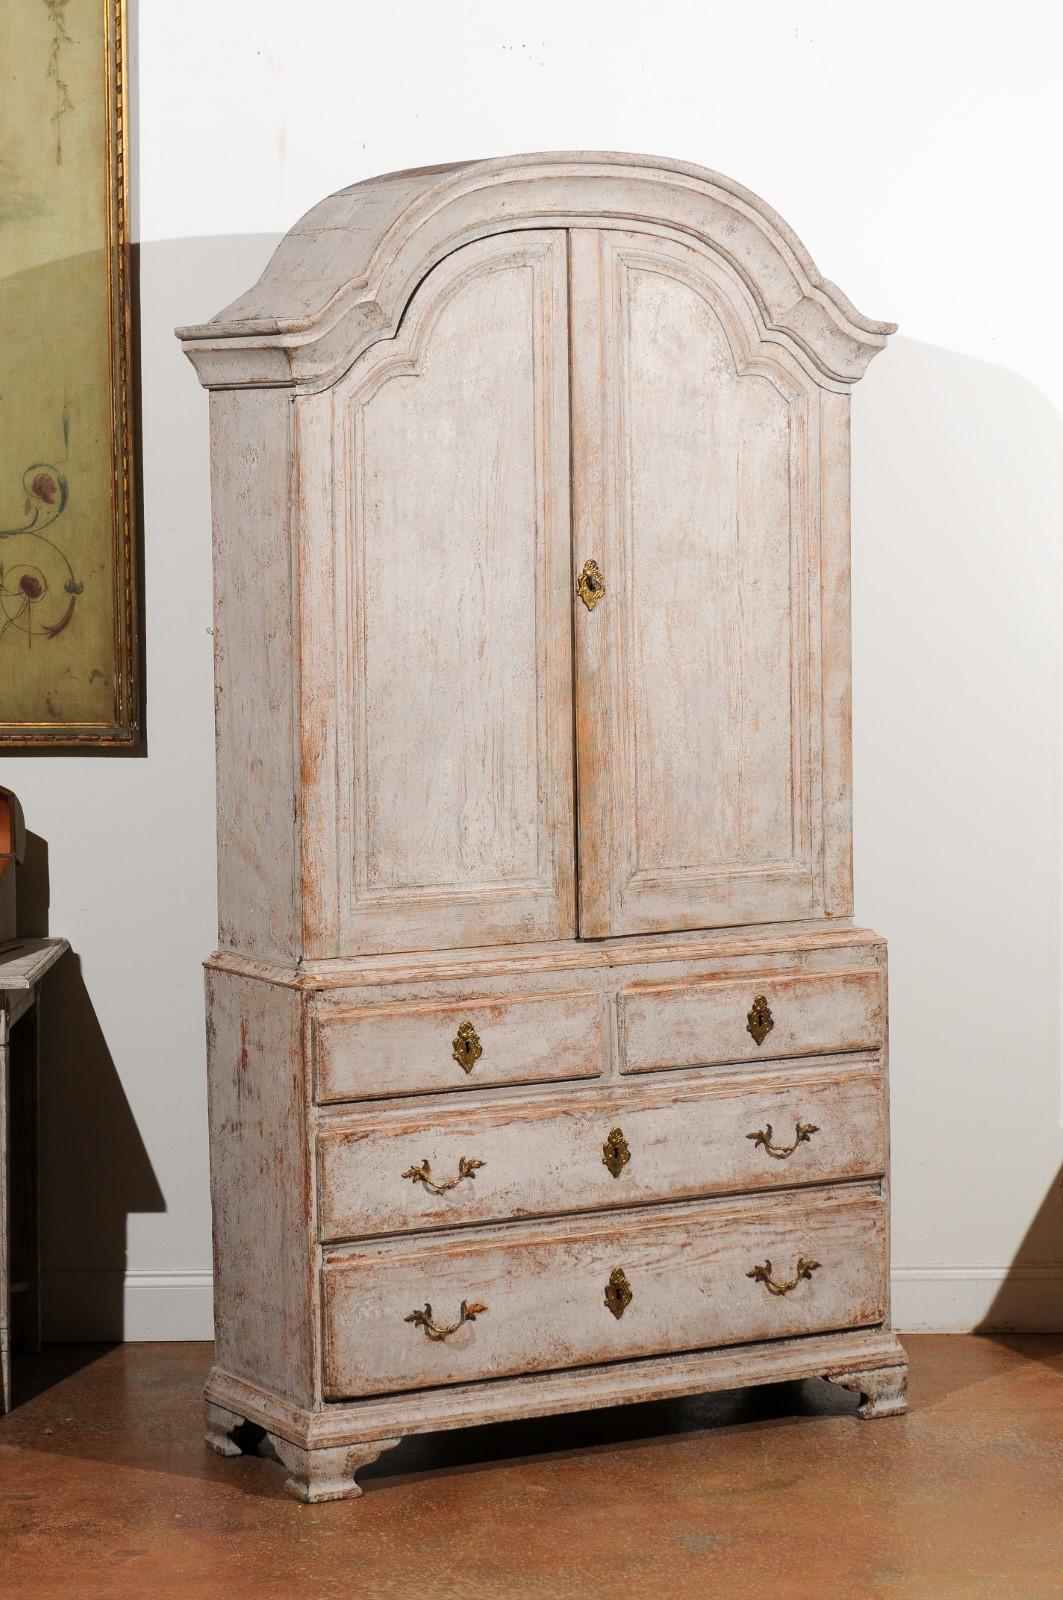 A Swedish Rococo period painted wood cupboard from the 18th century, with upper cabinet over four drawers. Created in Sweden during the third quarter of the 18th century, this painted cupboard features a bonnet cornice sitting above two arching